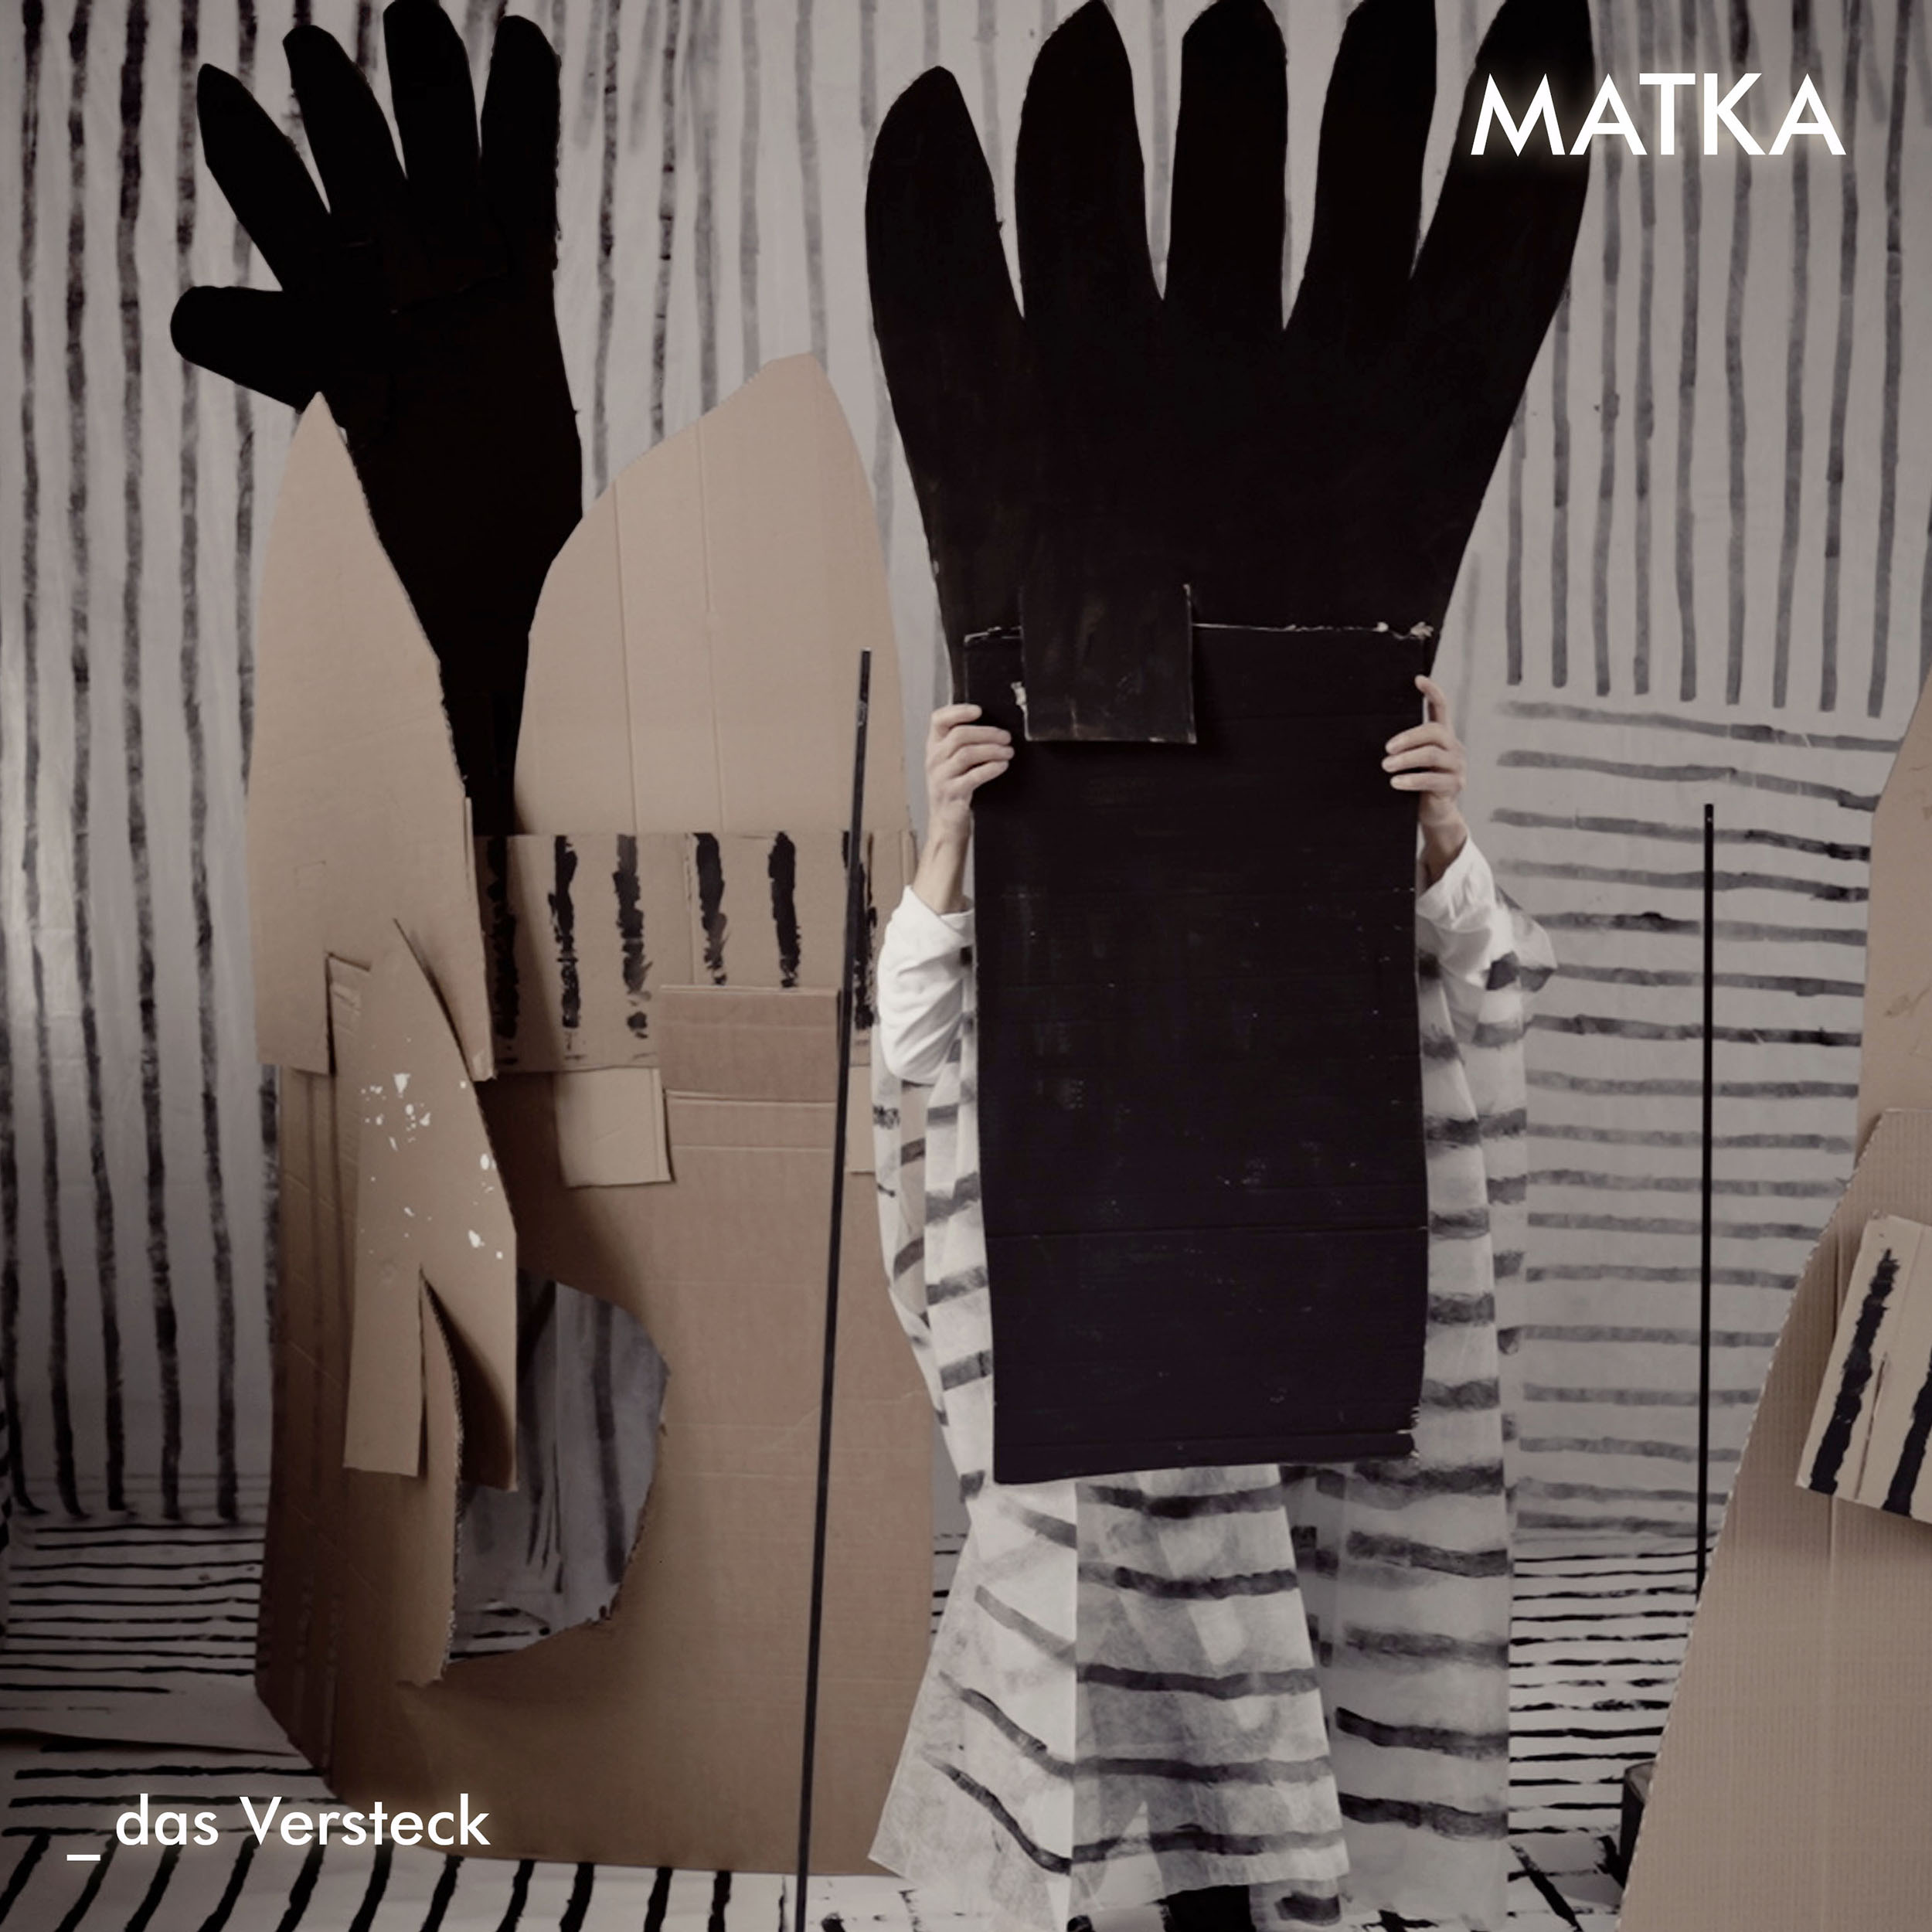 Matka’s tense and experimental new track “Das Versteck”